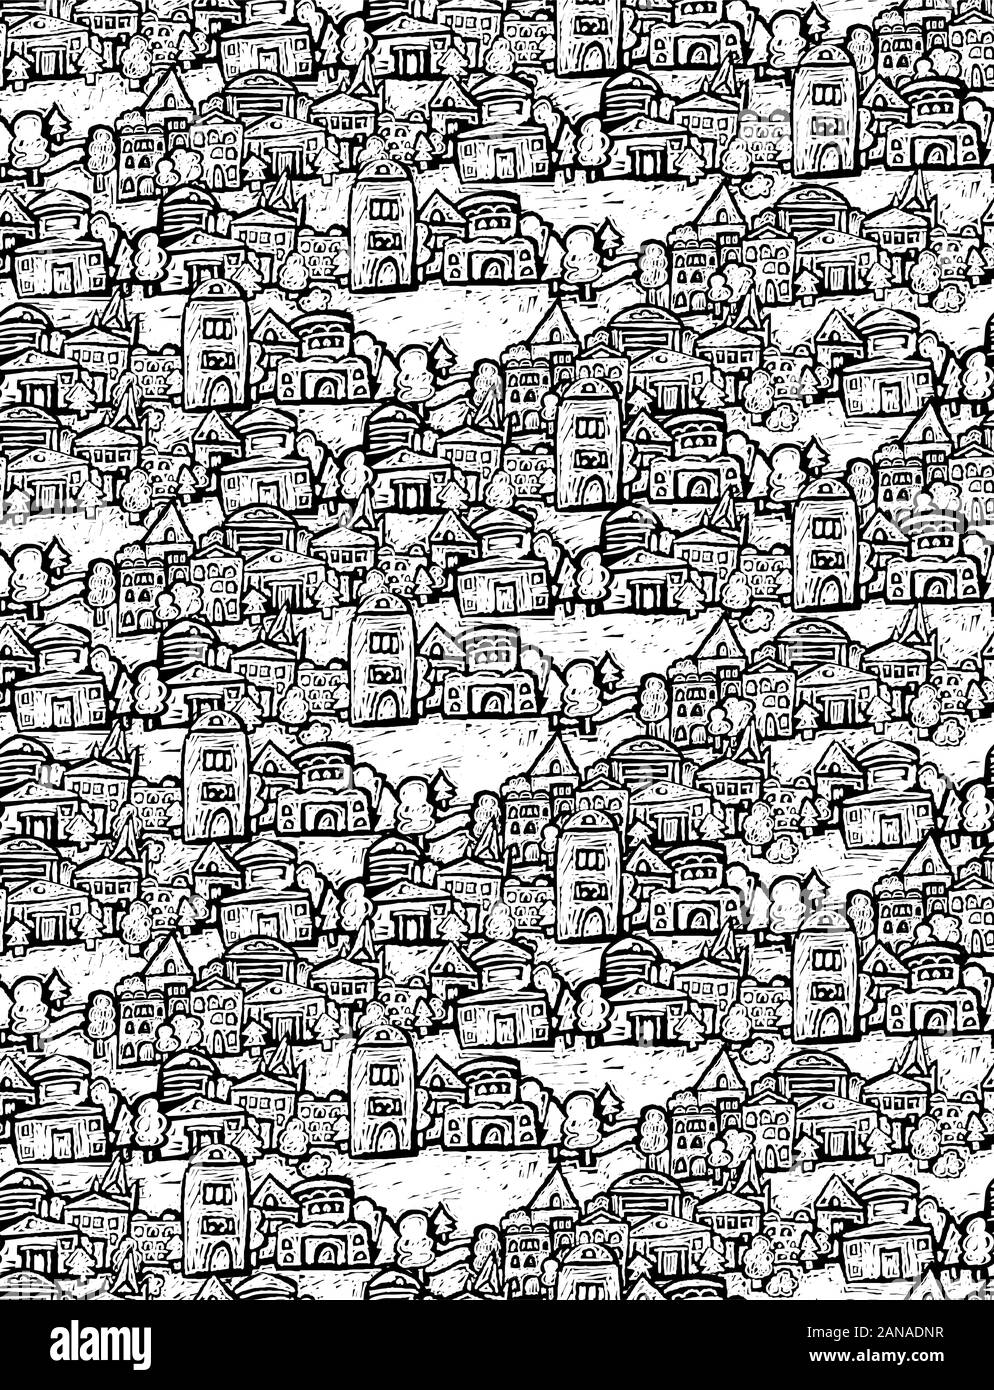 Suburb houses trees fields doodles black and white seamless pattern Stock Vector